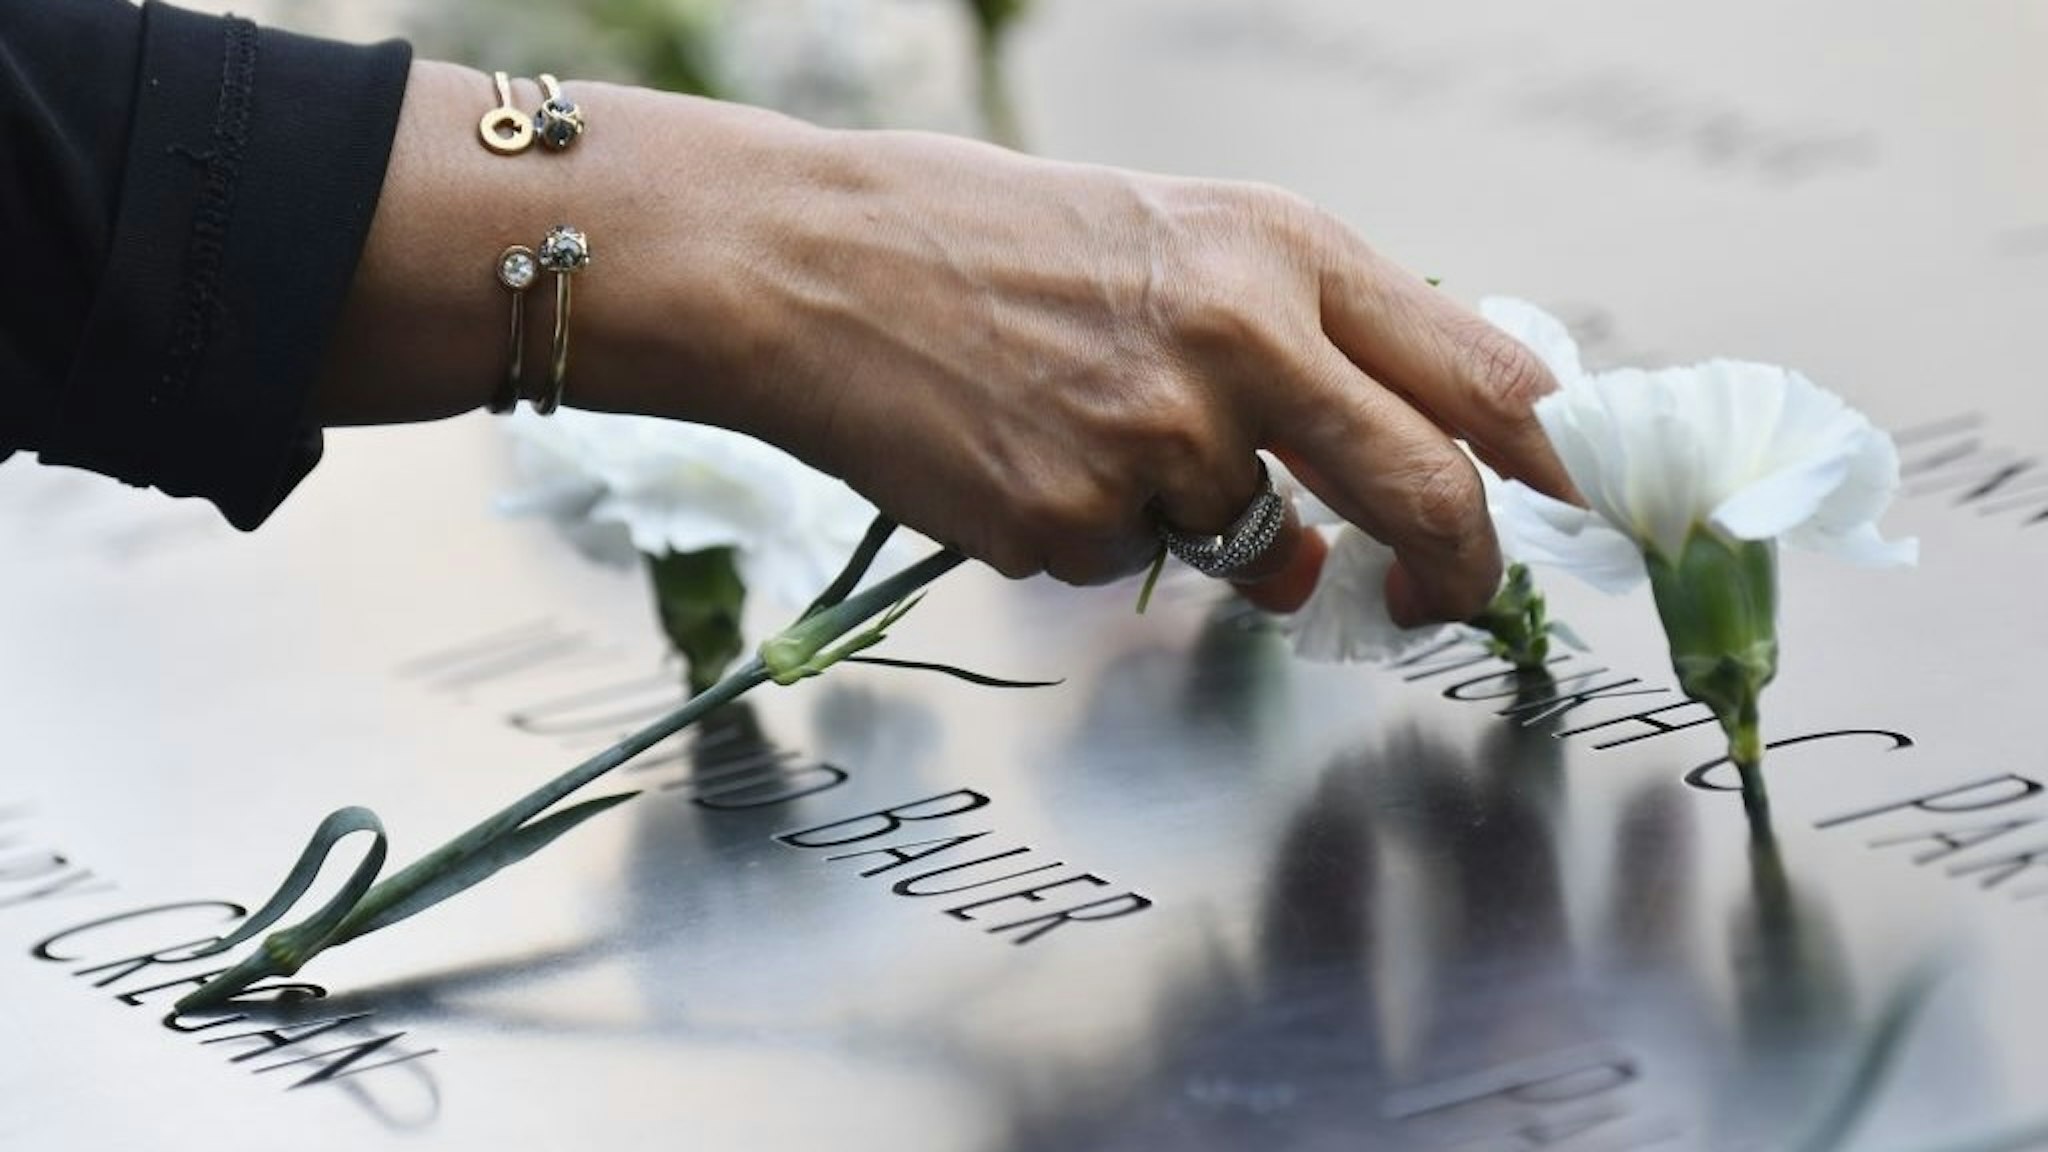 US-ATTACKS-9/11-ANNIVERSARY A mourner places flowers at the 9/11 Memorial & Museum in New York on September 11, 2020, as the US commemorates the 19th anniversary of the 9/11 attacks. (Photo by Angela Weiss / AFP) (Photo by ANGELA WEISS/AFP via Getty Images) ANGELA WEISS / Contributor via Getty Images